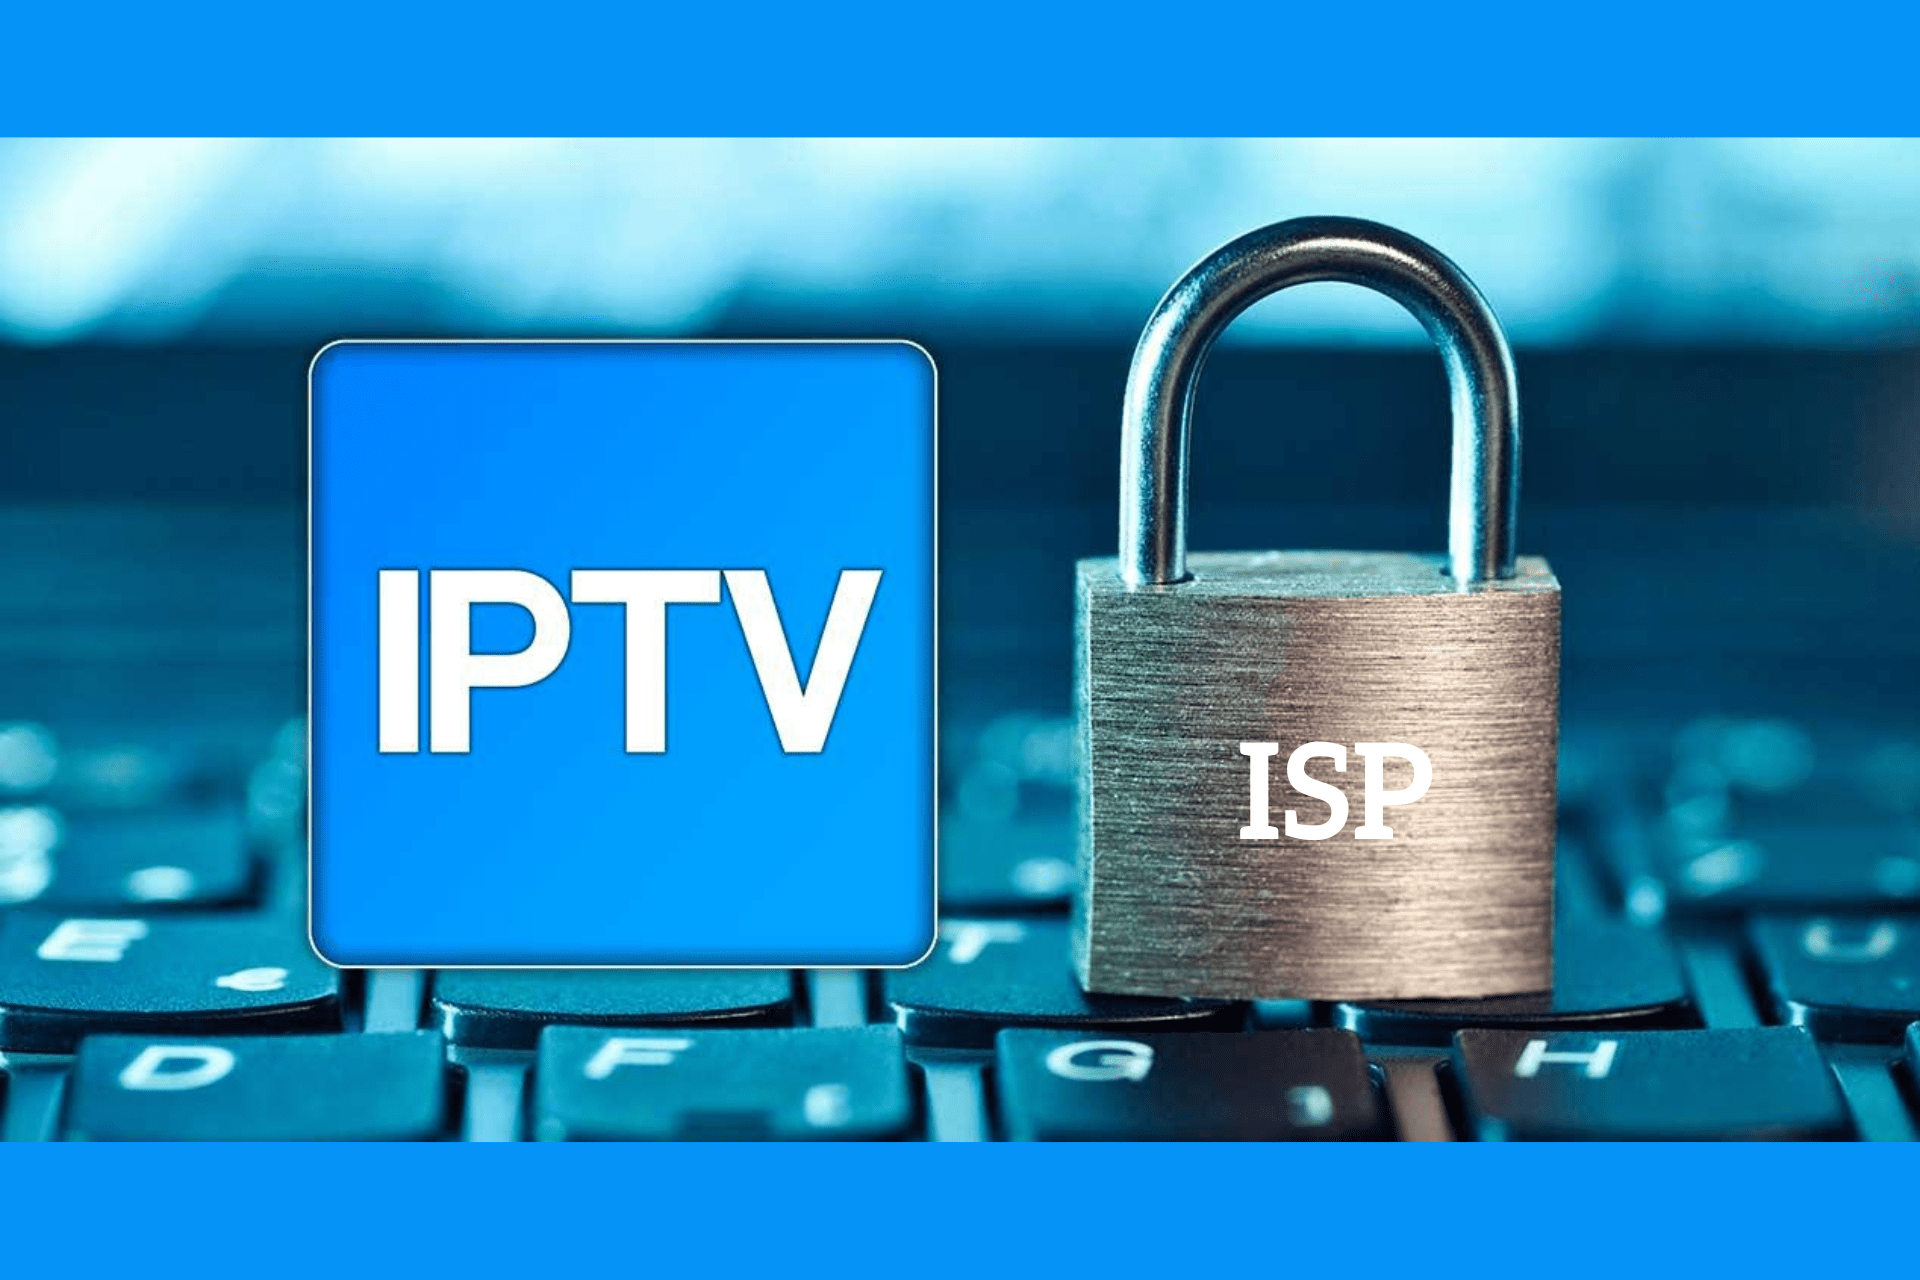 Italy has passed a new law to block pirate IPTV services and other illegal forms of live broadcasting.